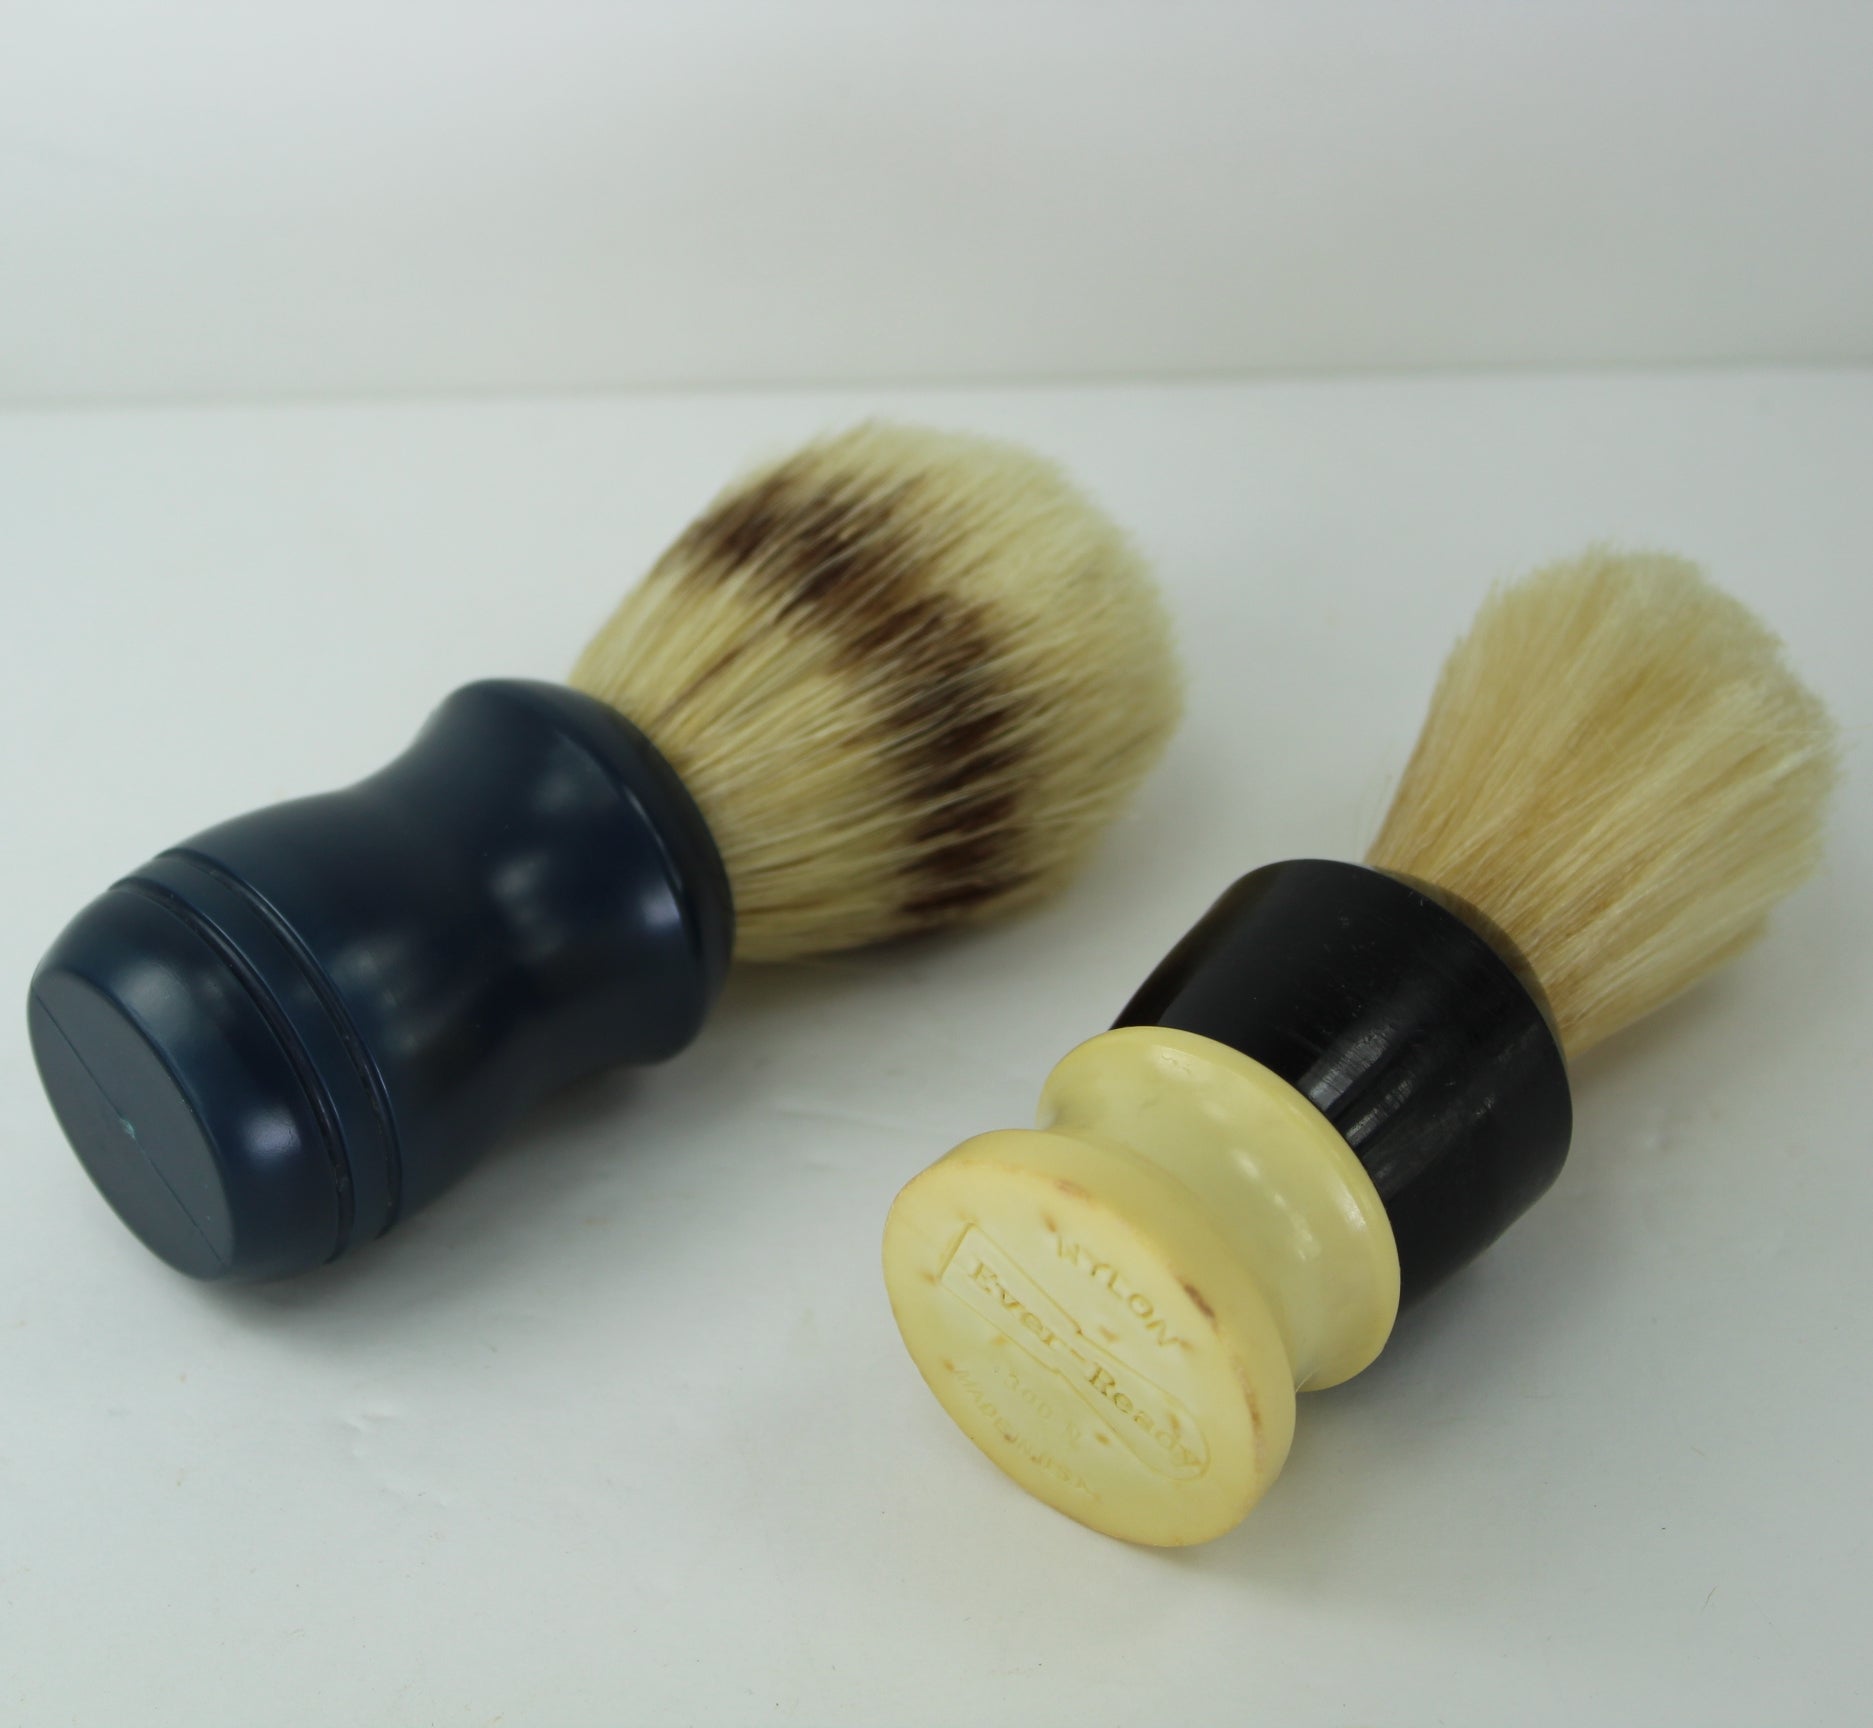 Pair Shaving Brushes Vintage Ever Ready Nylon Surrey Natural Bristle clean ready to use